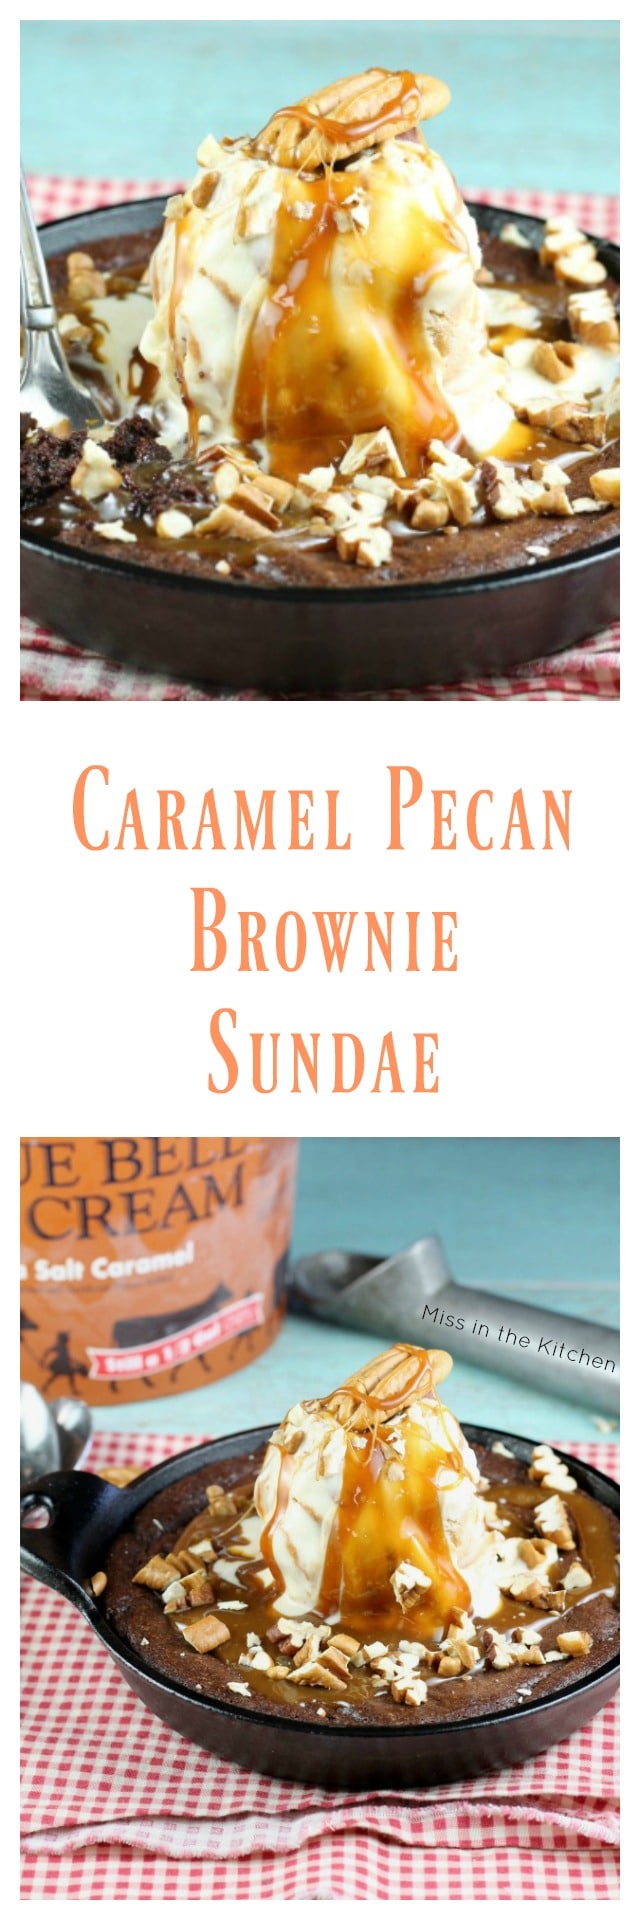 Caramel Pecan Brownie Sundae Recipe for two ~ perfect for romantic dinners and Valentine's Day from MissintheKitchen.com